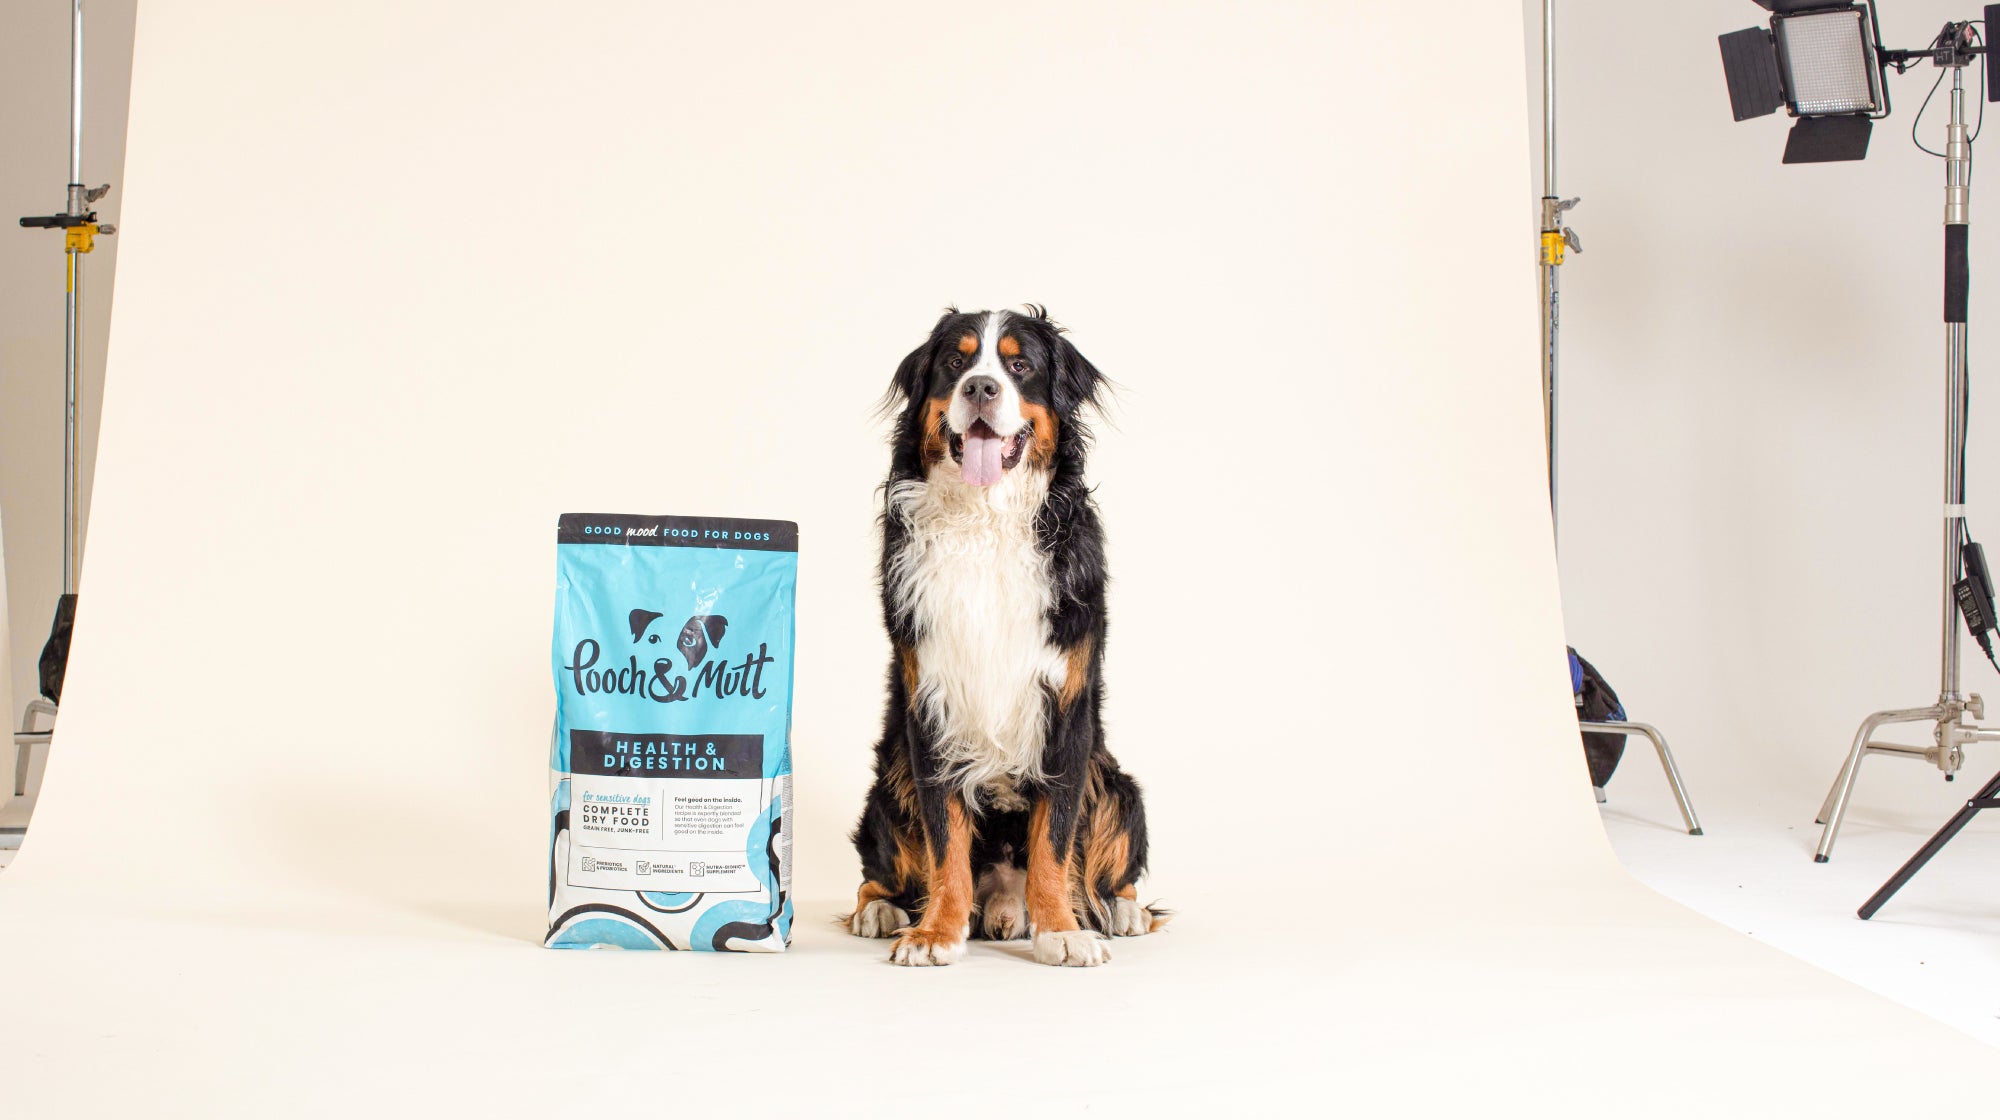 A black, brown, and white dog, sat next to a bag of Pooch & Mutt Health & Digestion food, on a photography set